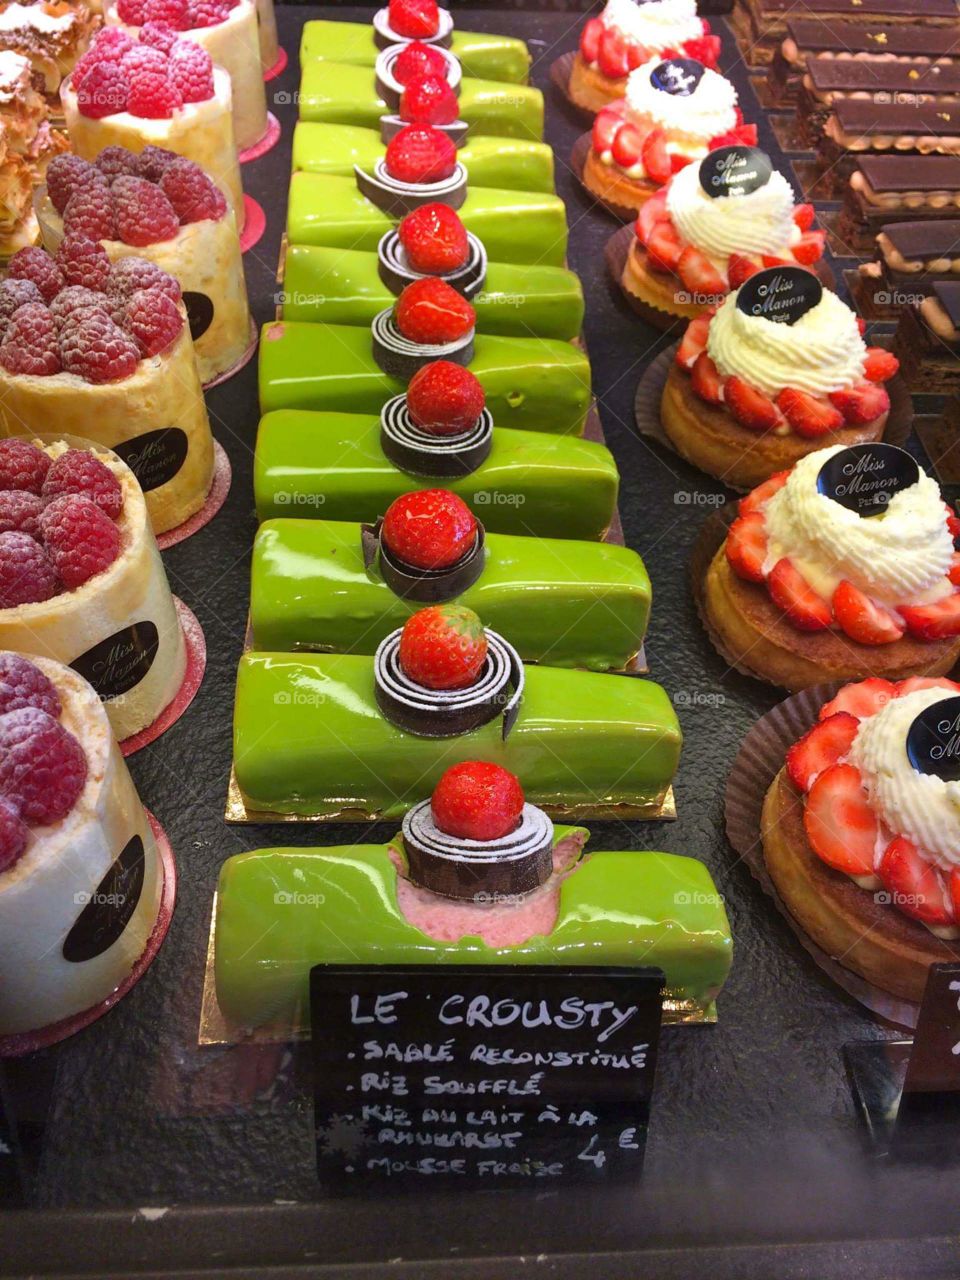 Fun colorful pastries on the streets of Paris!